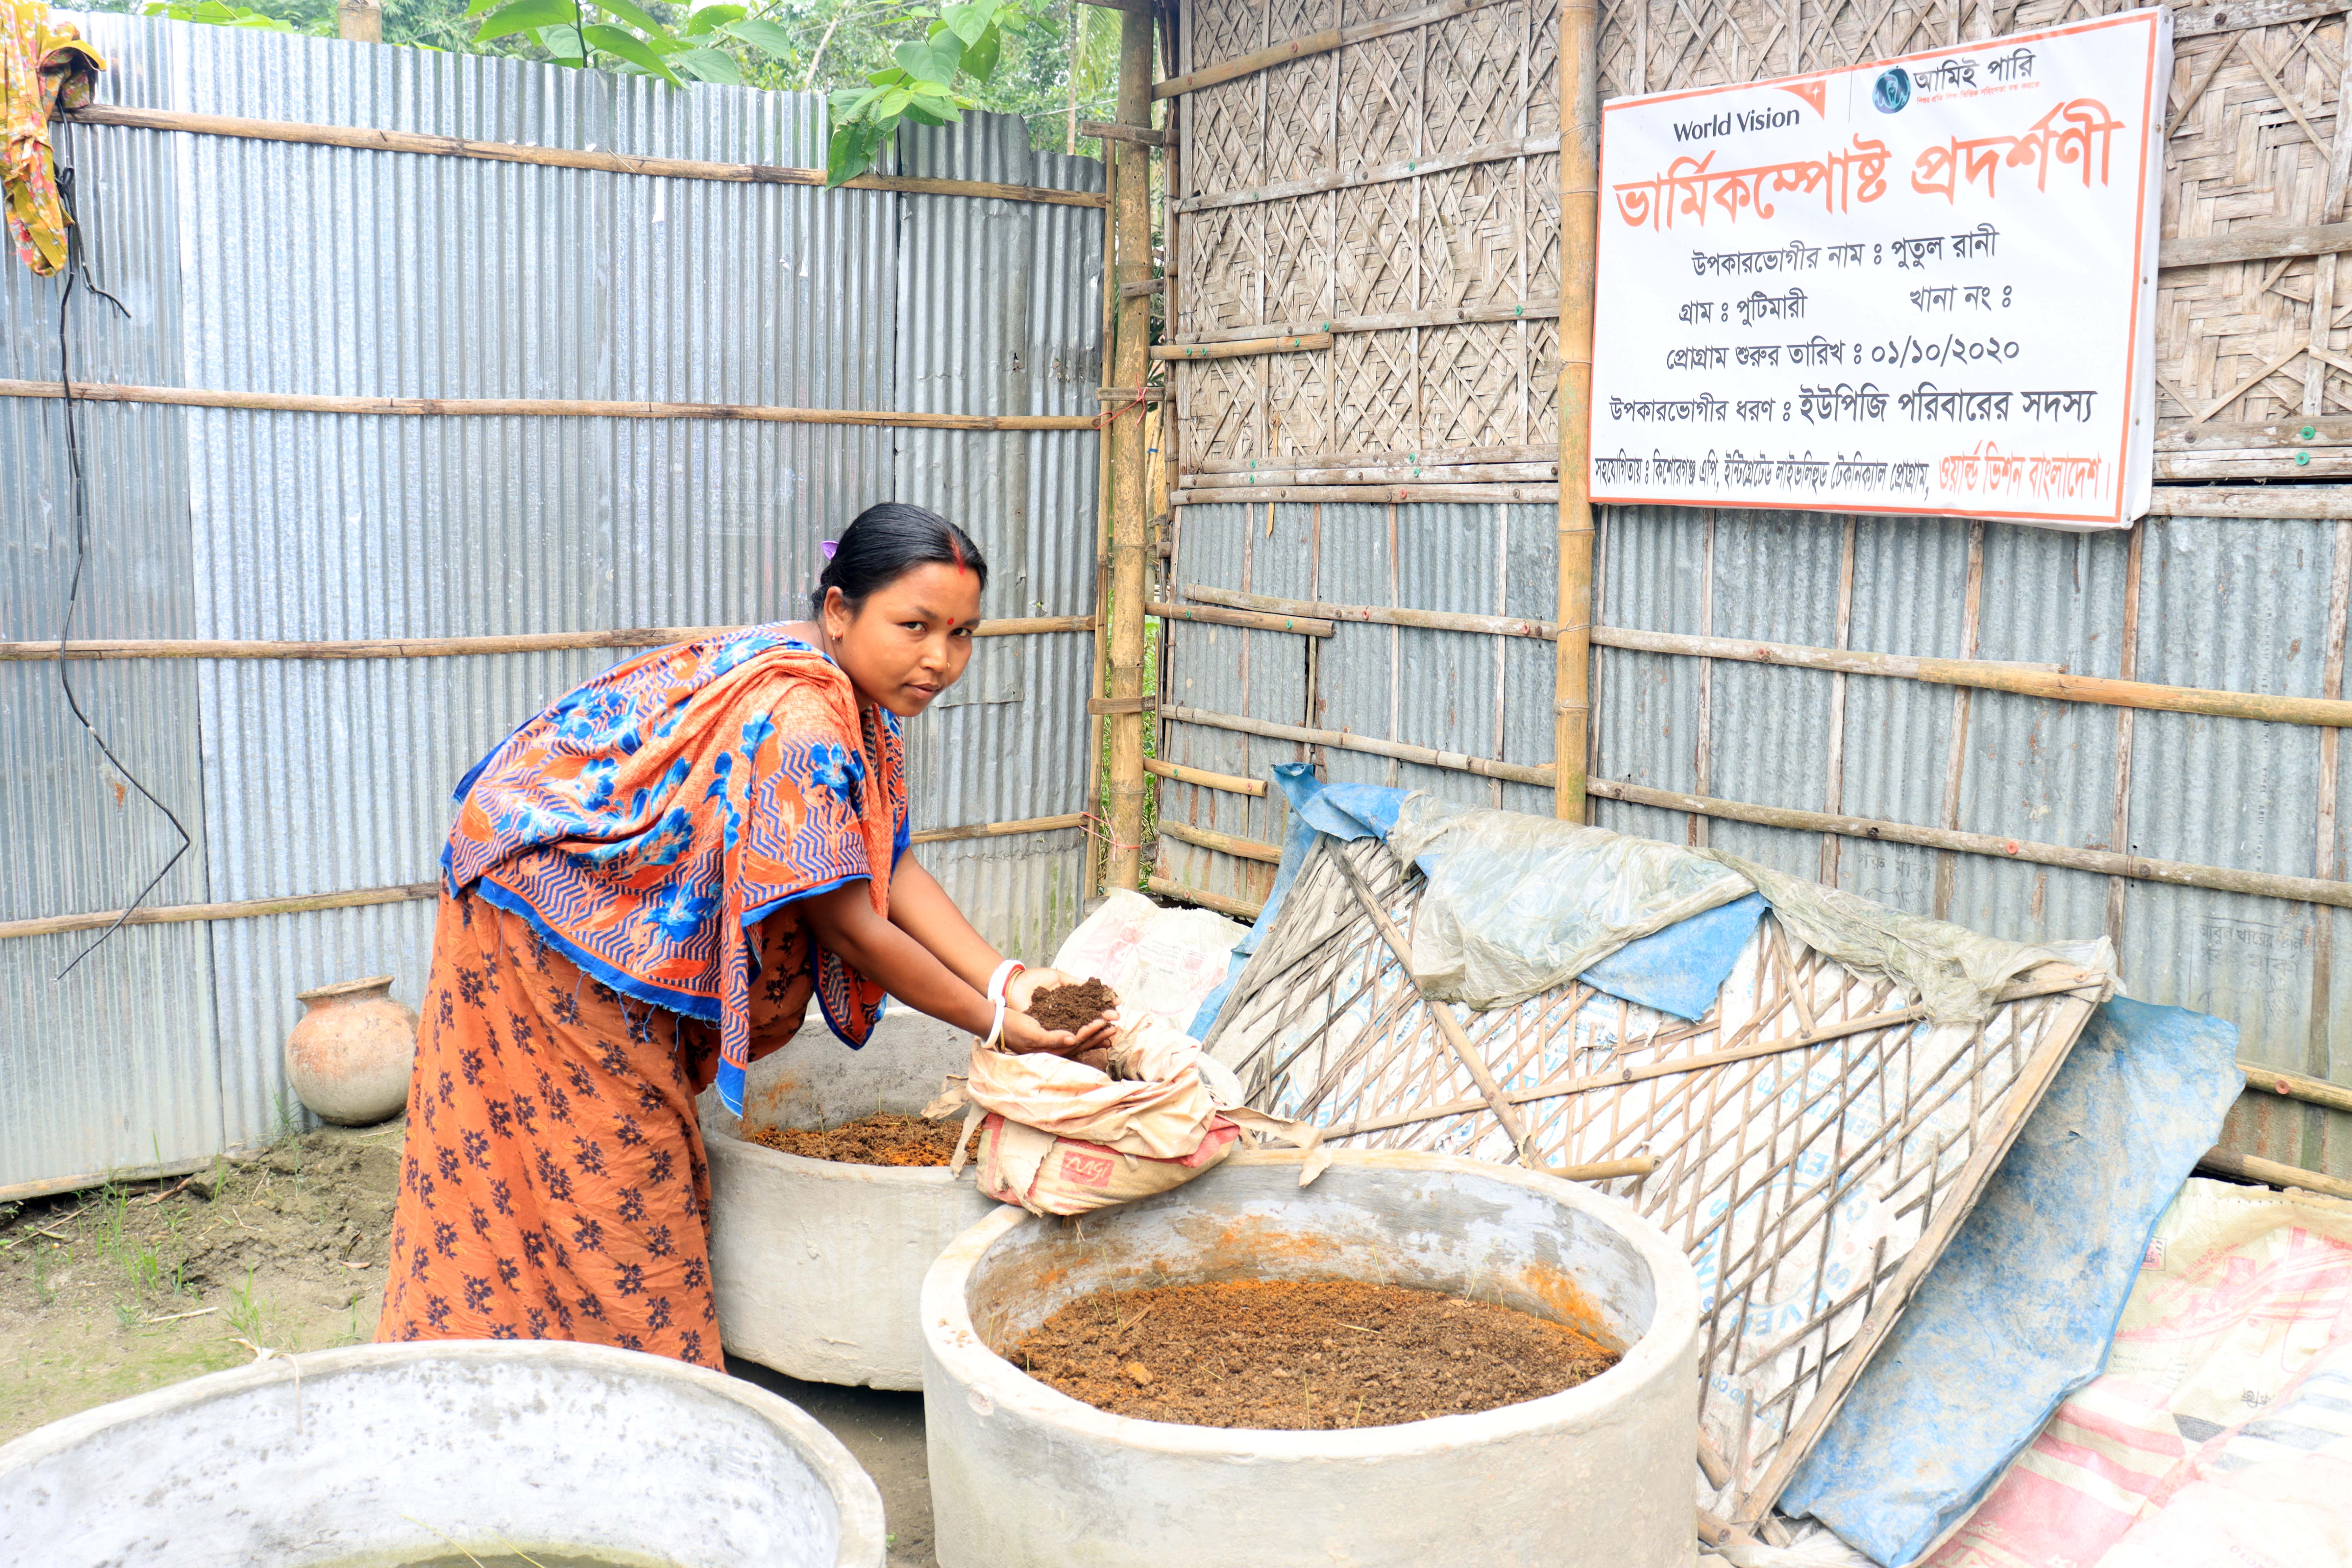 Putul, one of the vermicompost producers, says, "I not only use the vermicompost for my own crops but also selling vermicompost to the others farmers." 